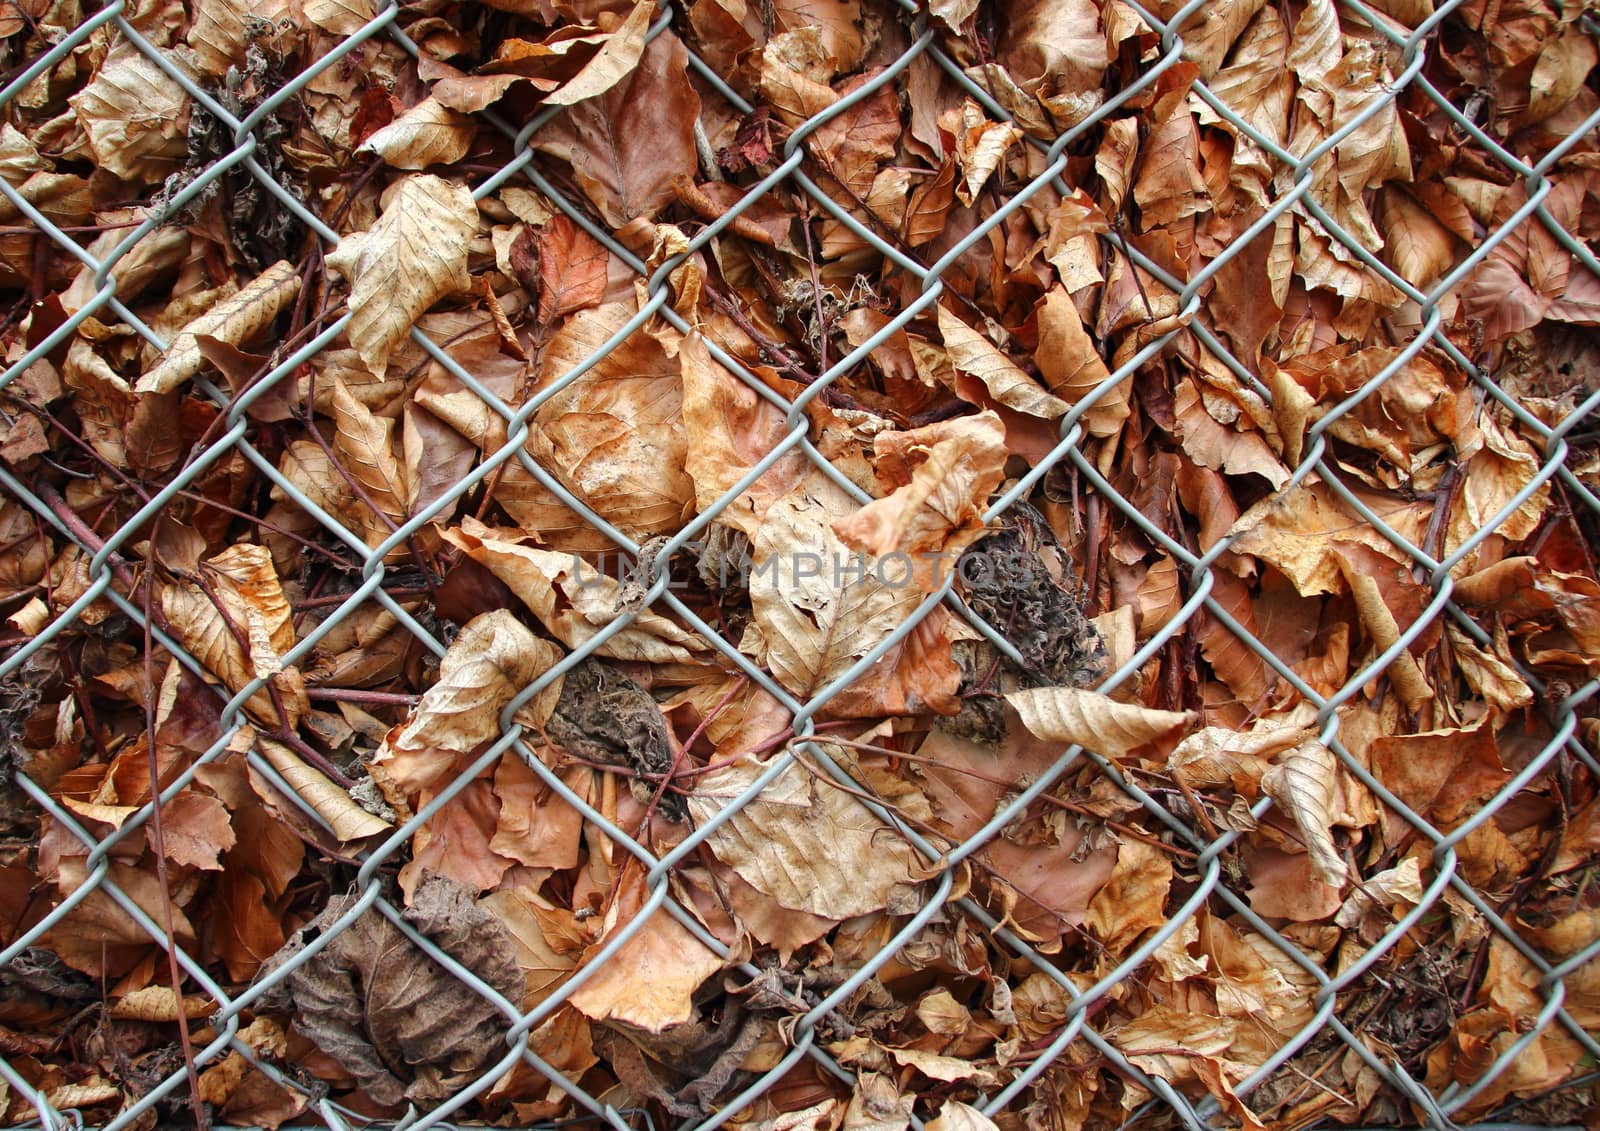 Autumn dead leaves behind metal grid fence by HoleInTheBox